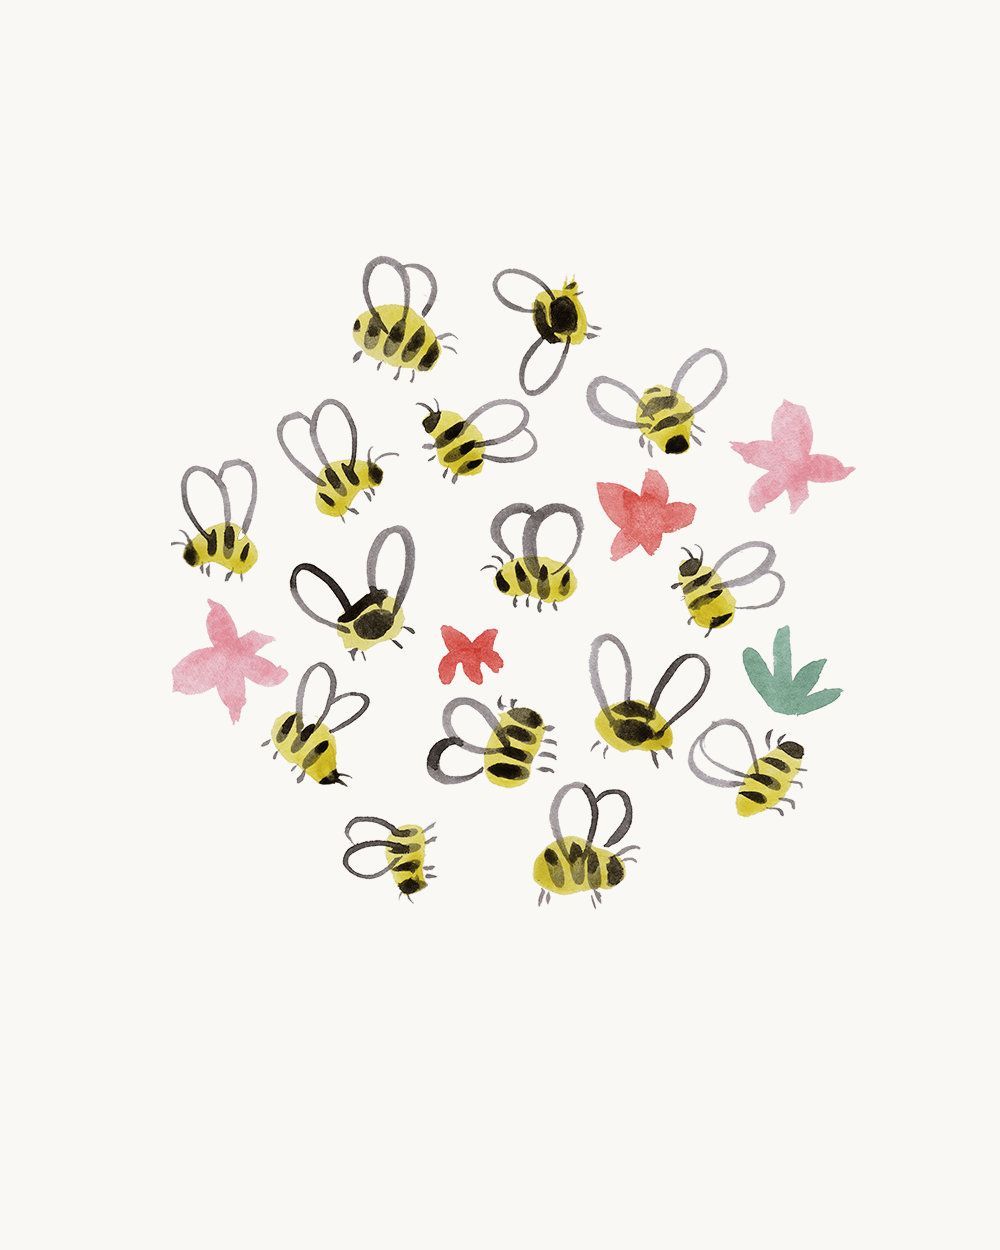 Worker Bee Save The Bees Manchester Bee Print A4 A5. Etsy. Bee Print, Save The Bees, Bee Illustration